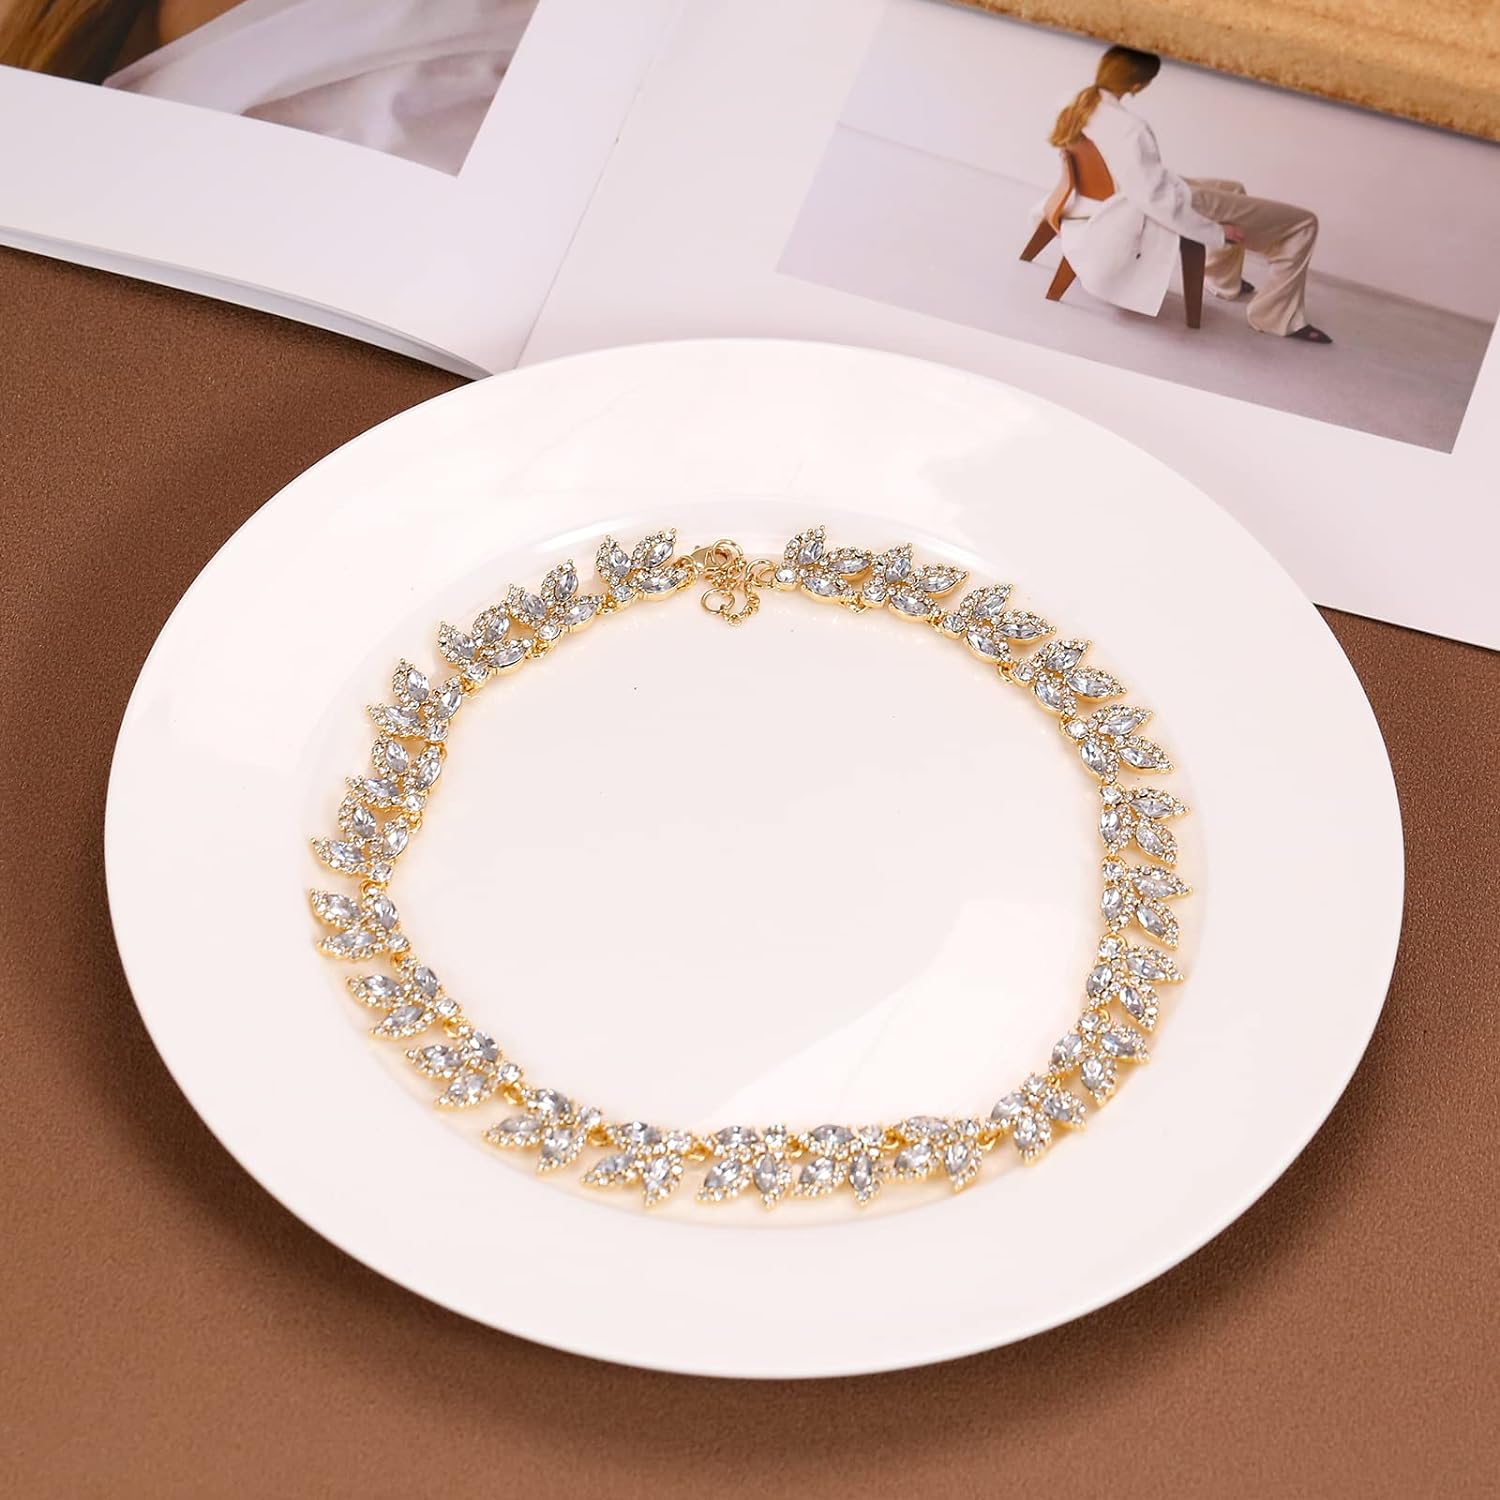 TOVABA Bridesmaid Rhinestone Jewelry Set for Women，Chunky Rhinestone Gold Leaf Collar Necklace Jewelry, Women and Girls Wedding Gifts Jewelry Sets for Party